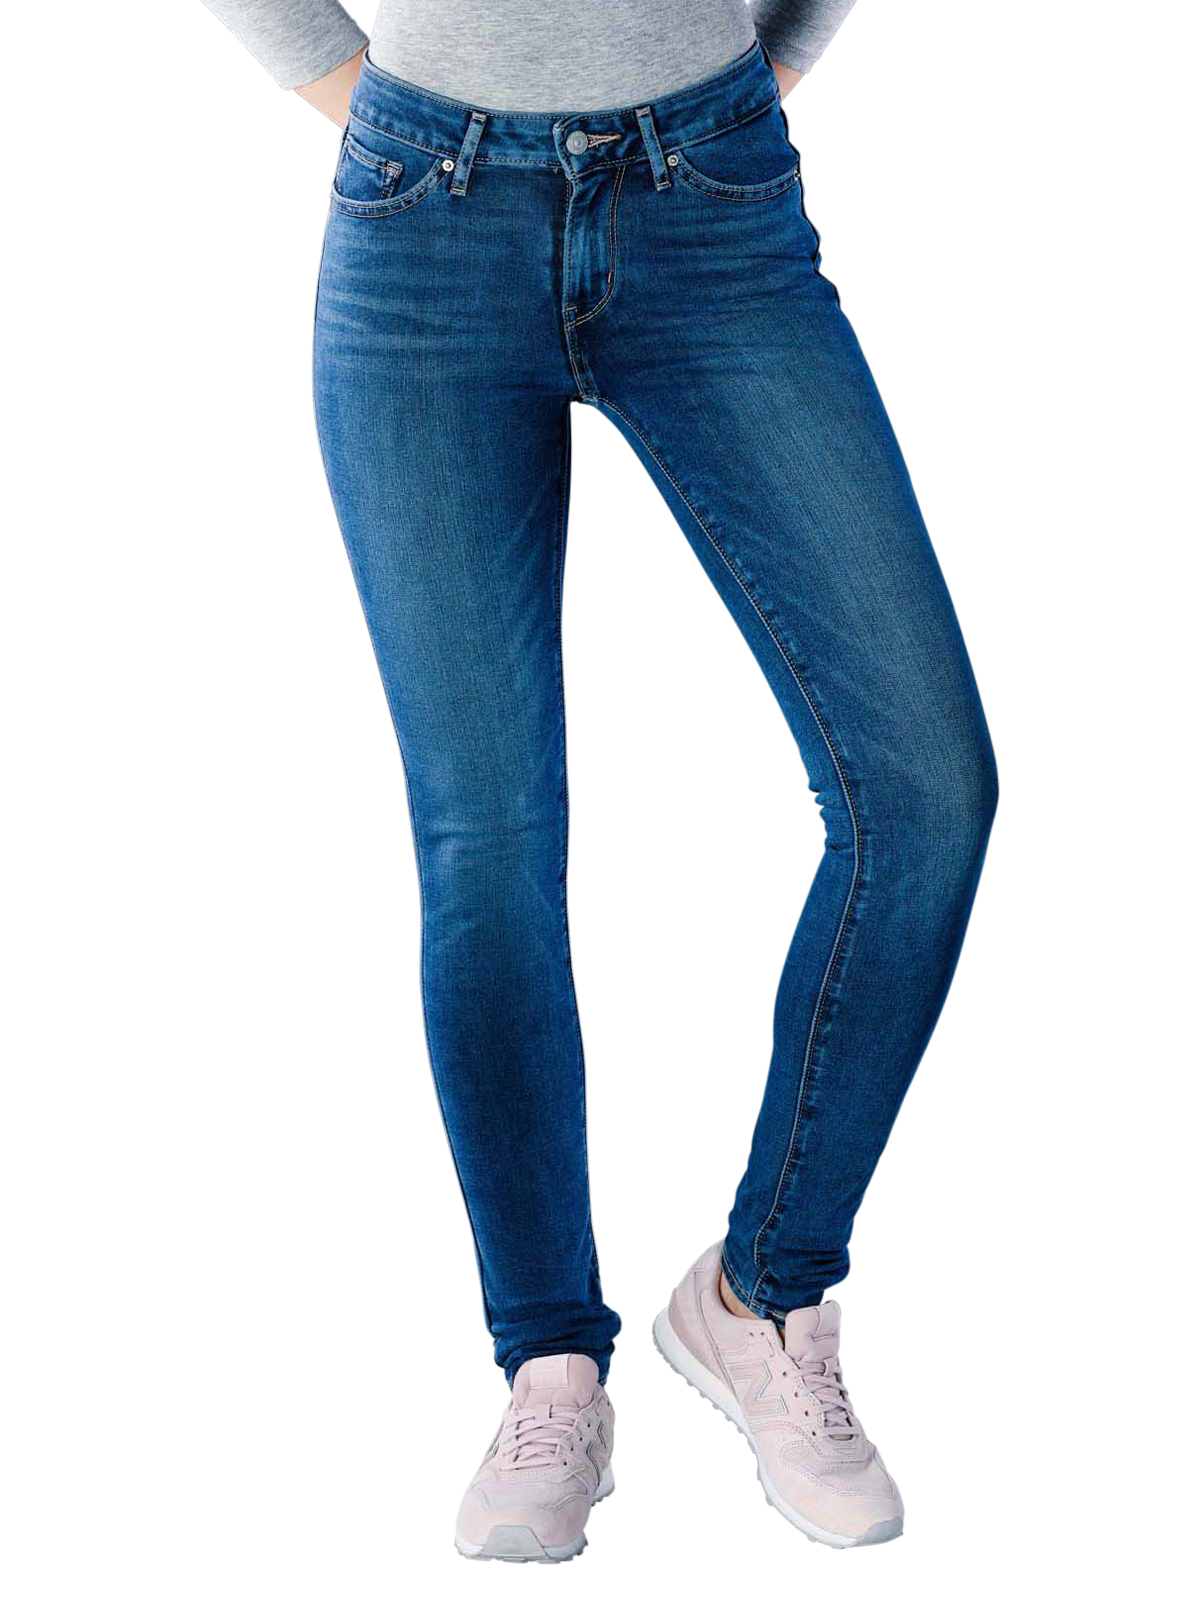 Levi's 711 Skinny Jeans forever blues t2 | free shipping ... - Levi's for Women